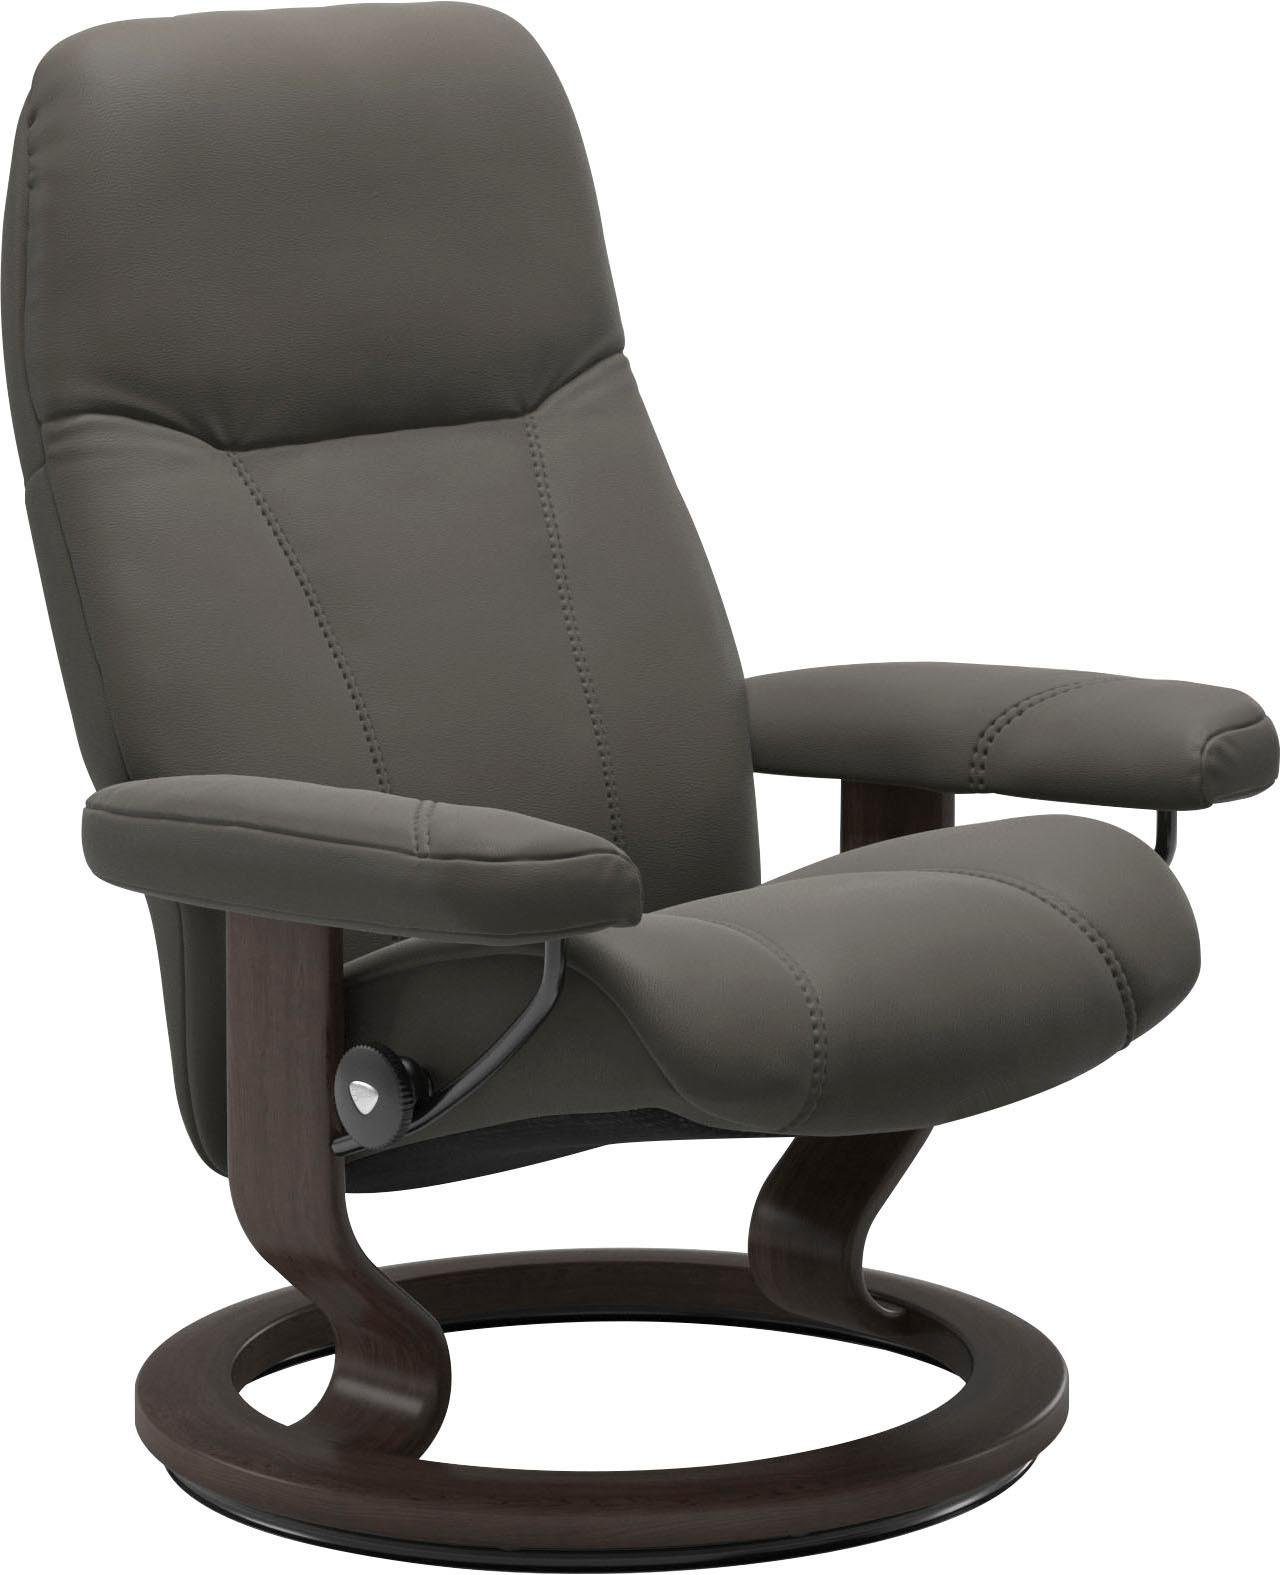 Base, L, mit Classic Gestell Relaxsessel Größe Wenge Consul, Stressless®